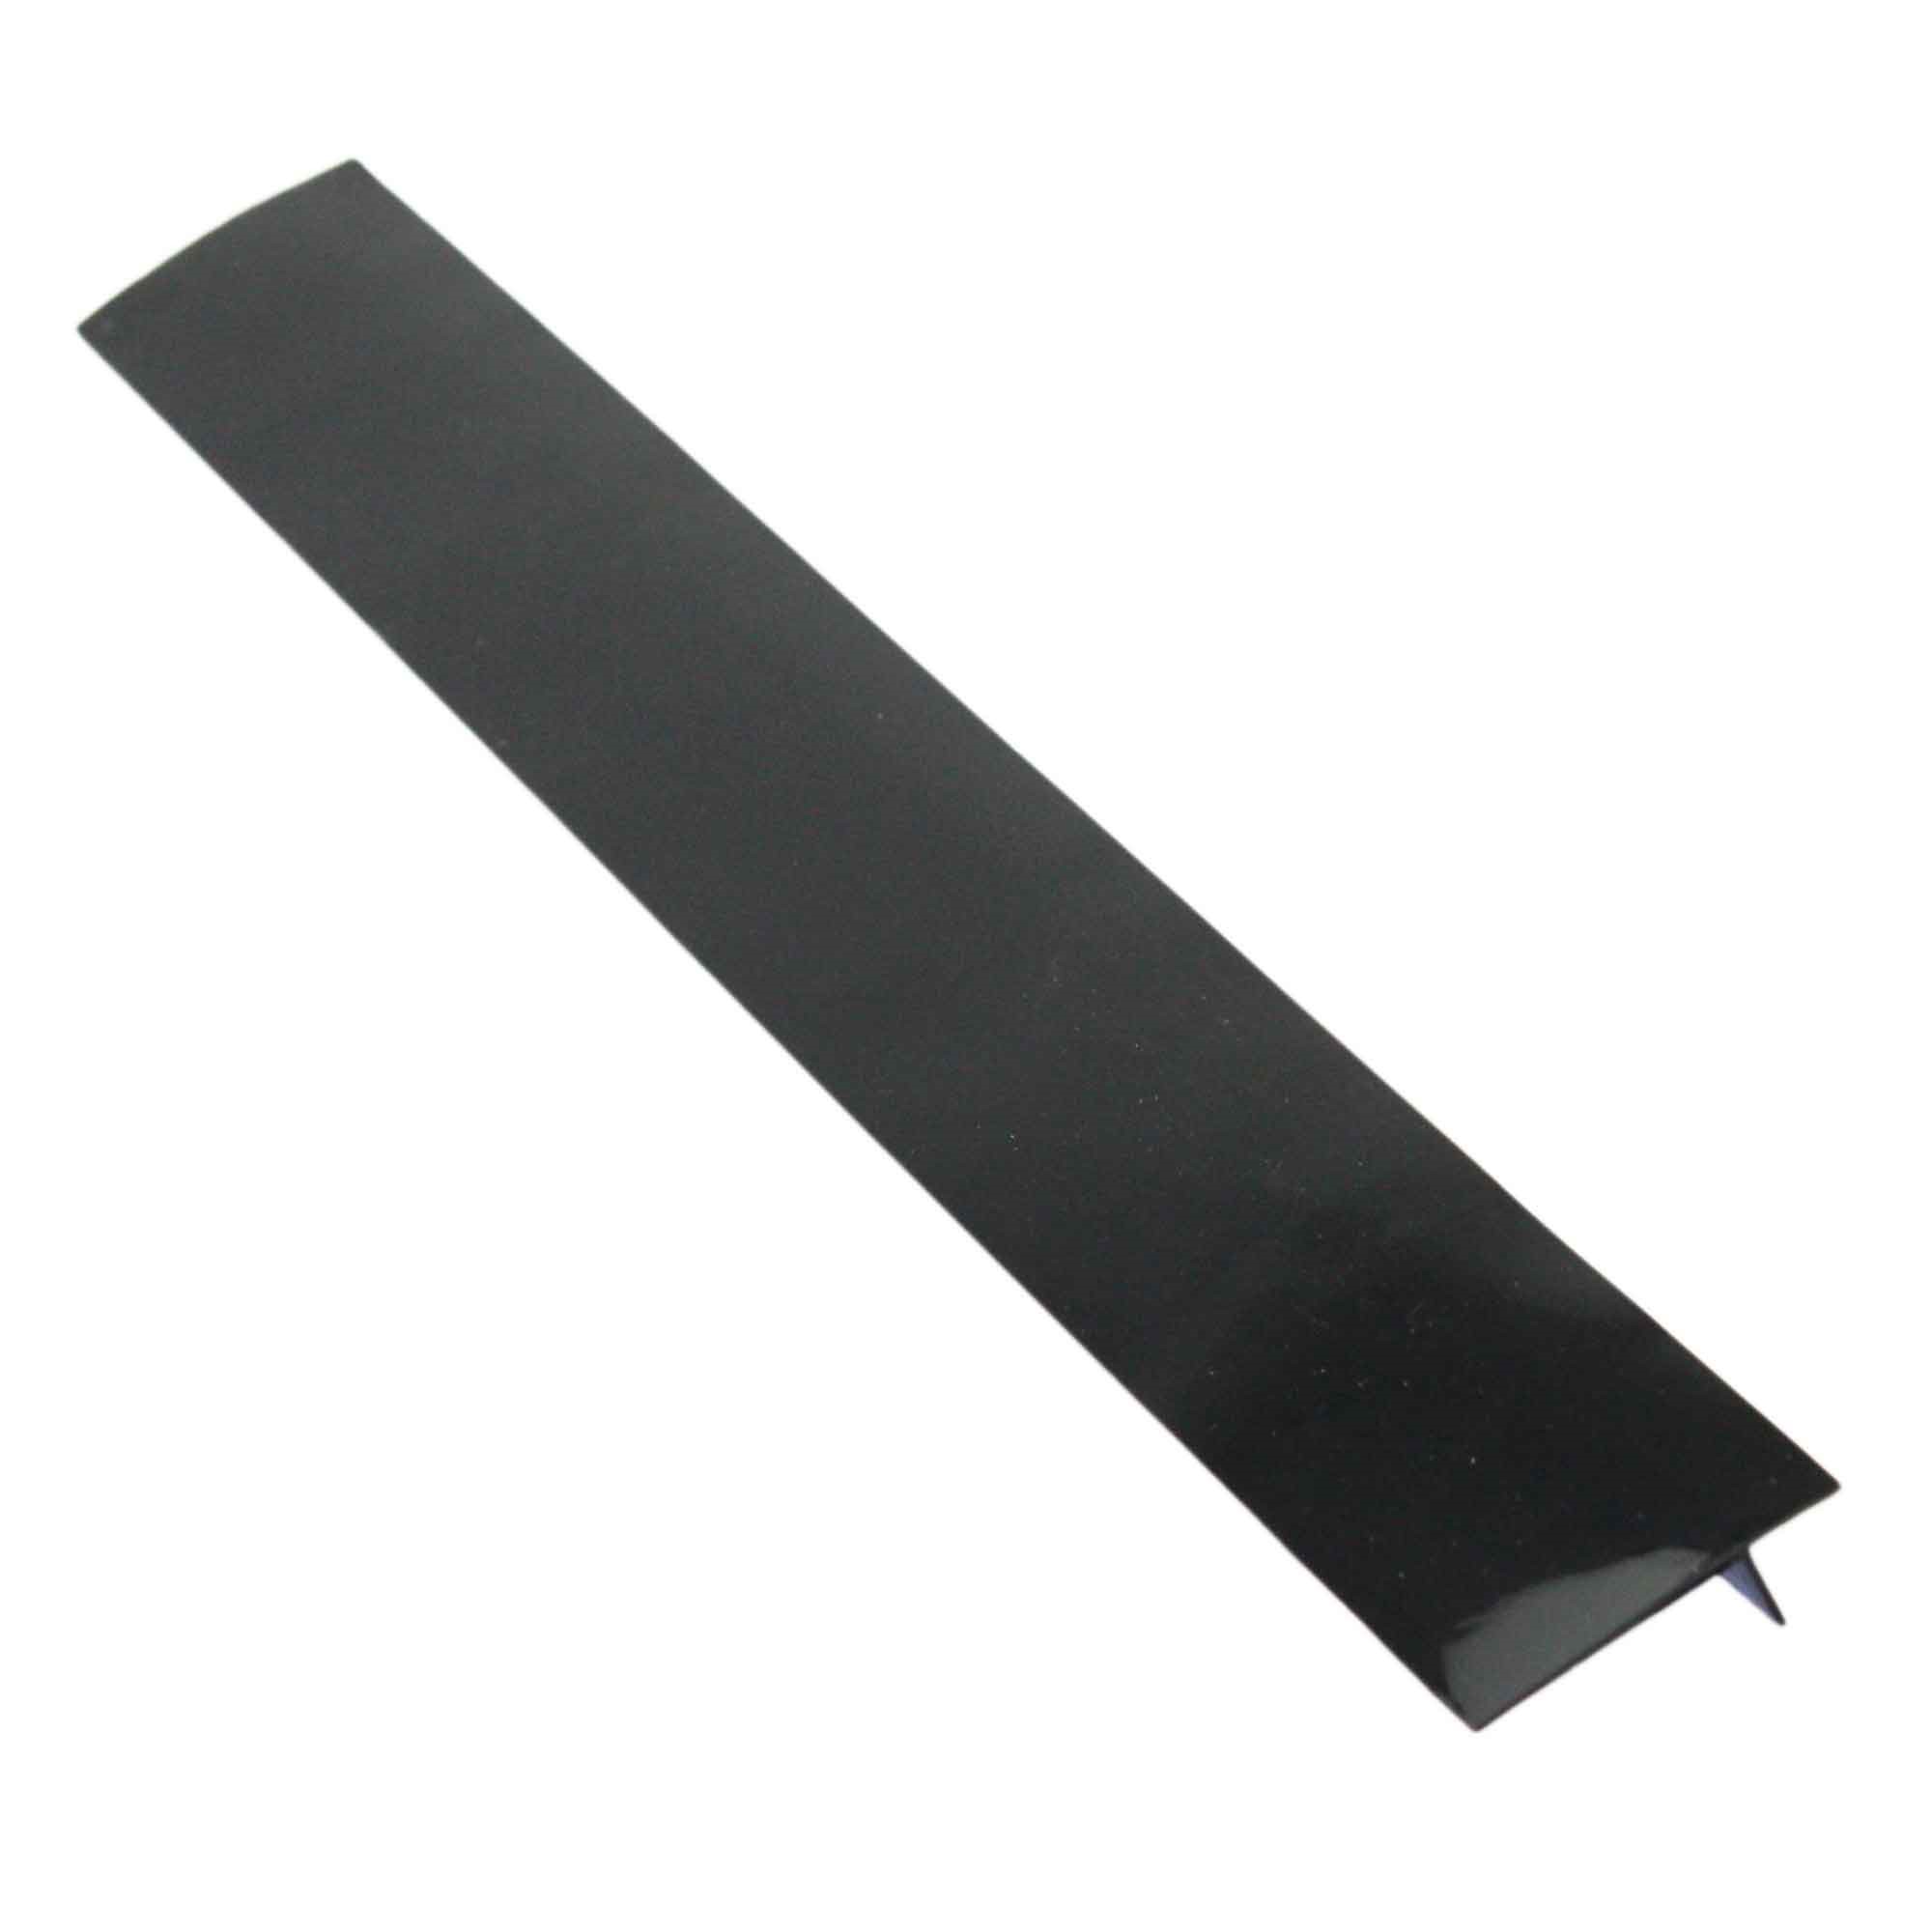 Range Kleen 1 Piece Black Silicone Kleen Seam, 20.5 inches long - image 4 of 5